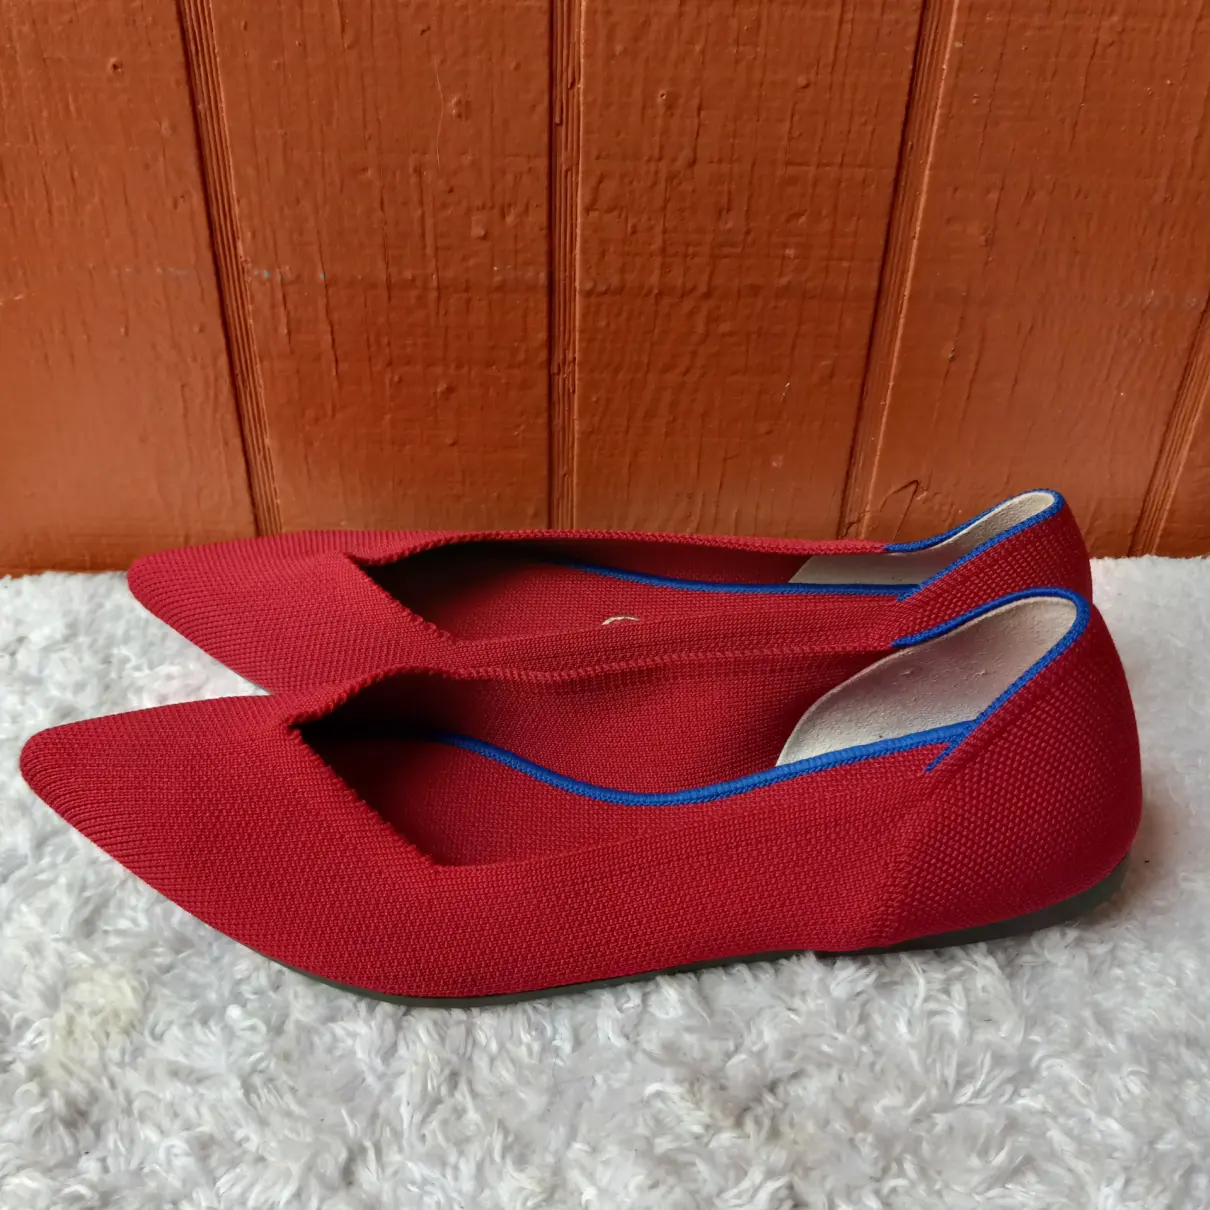 Buy Rothy's Cloth ballet flats online